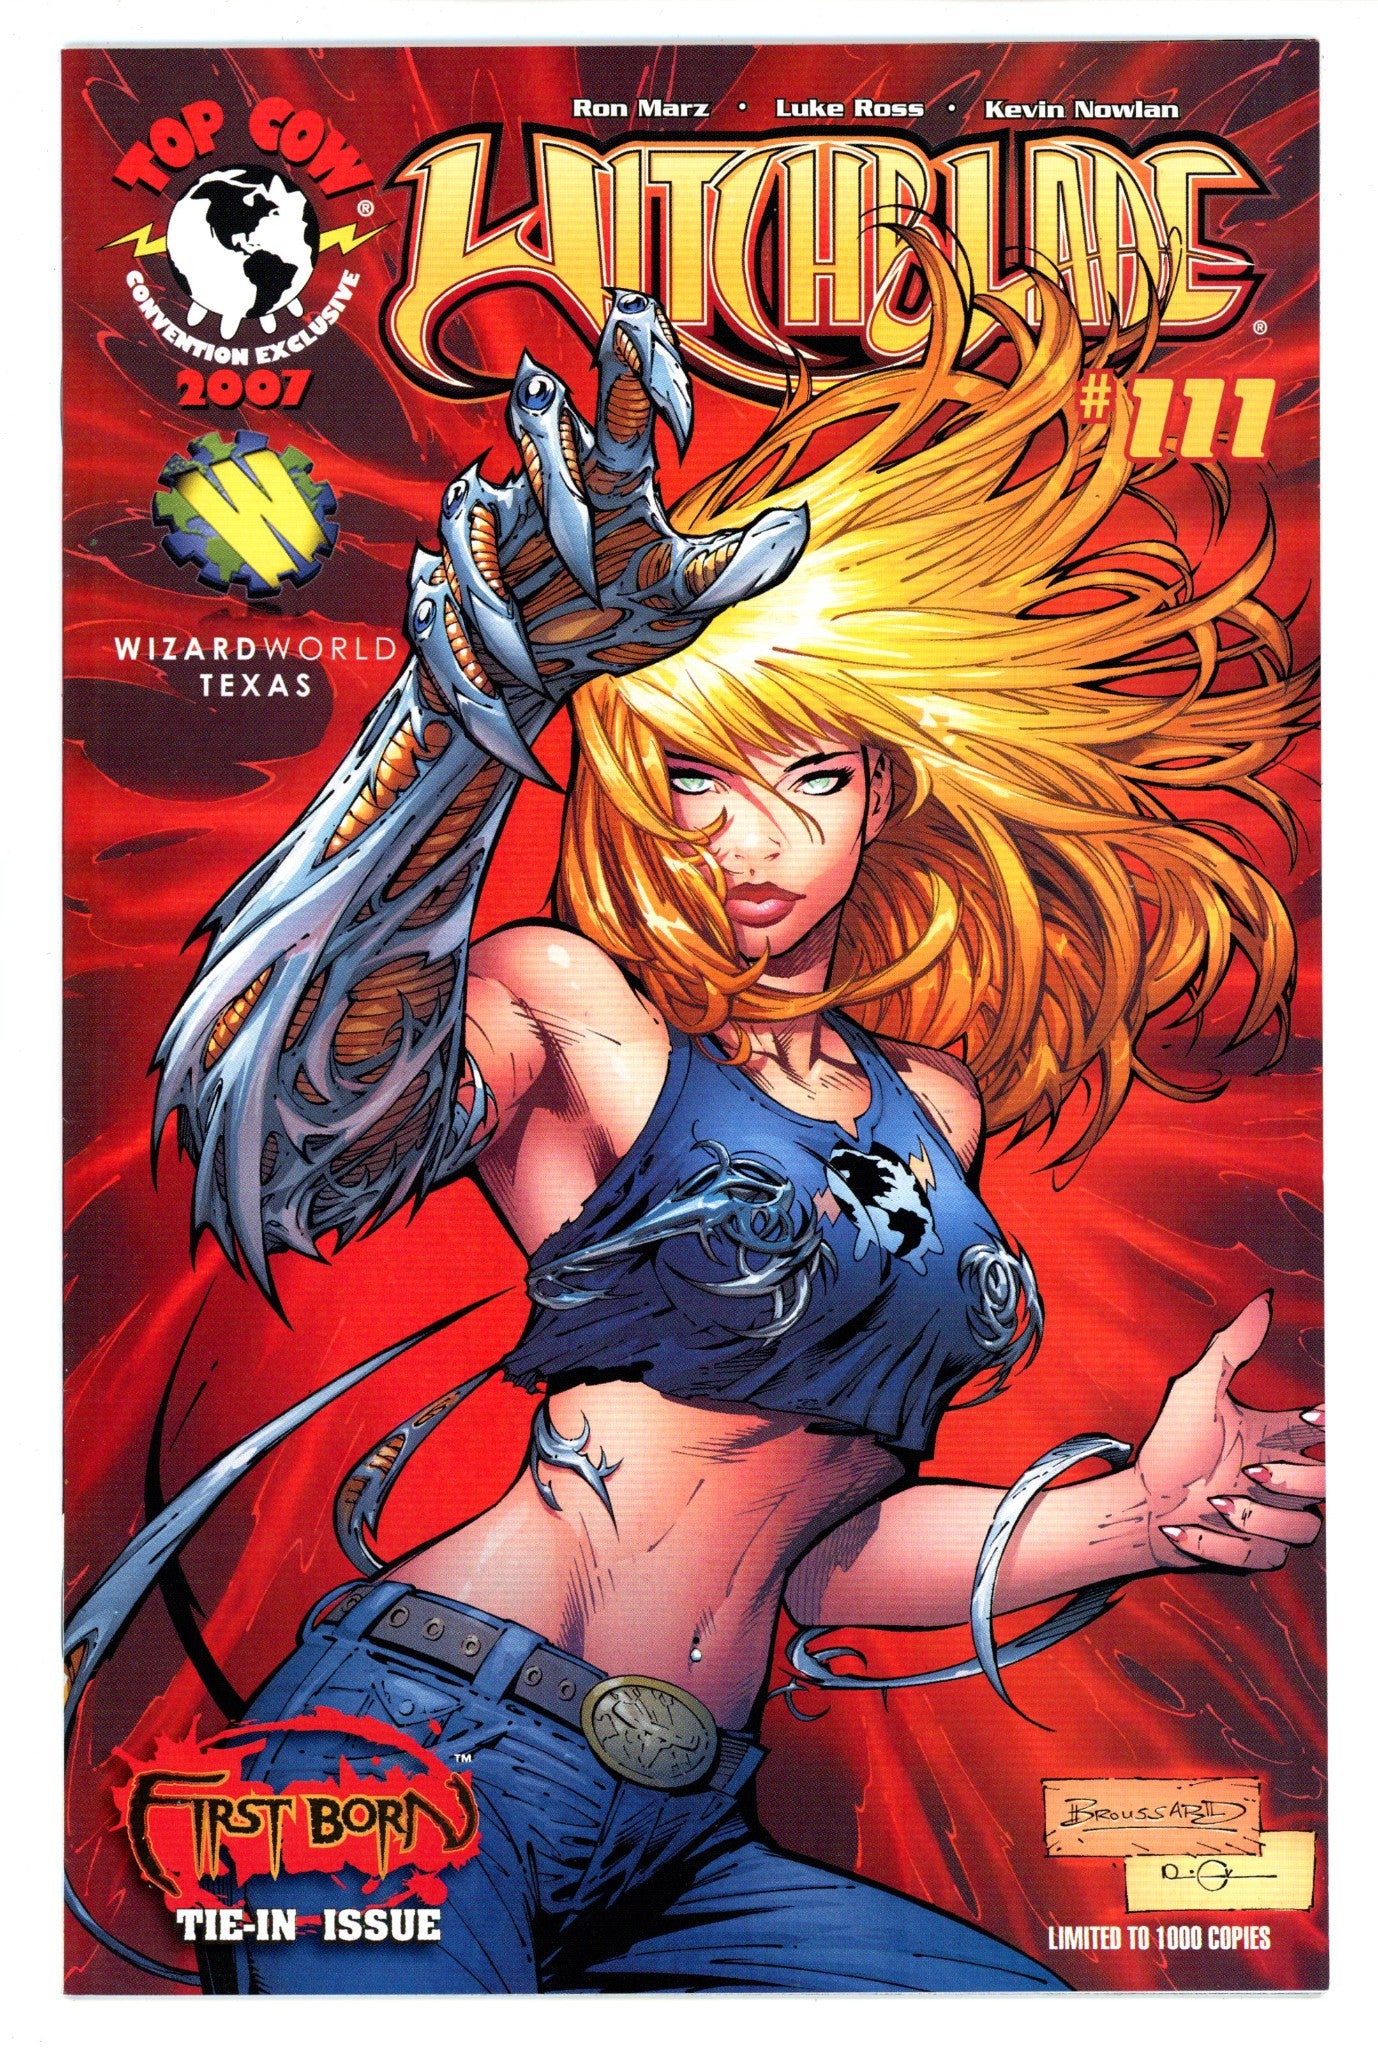 Witchblade Vol 1 111 VF+ (8.5) (2007) Broussard Convention Variant 